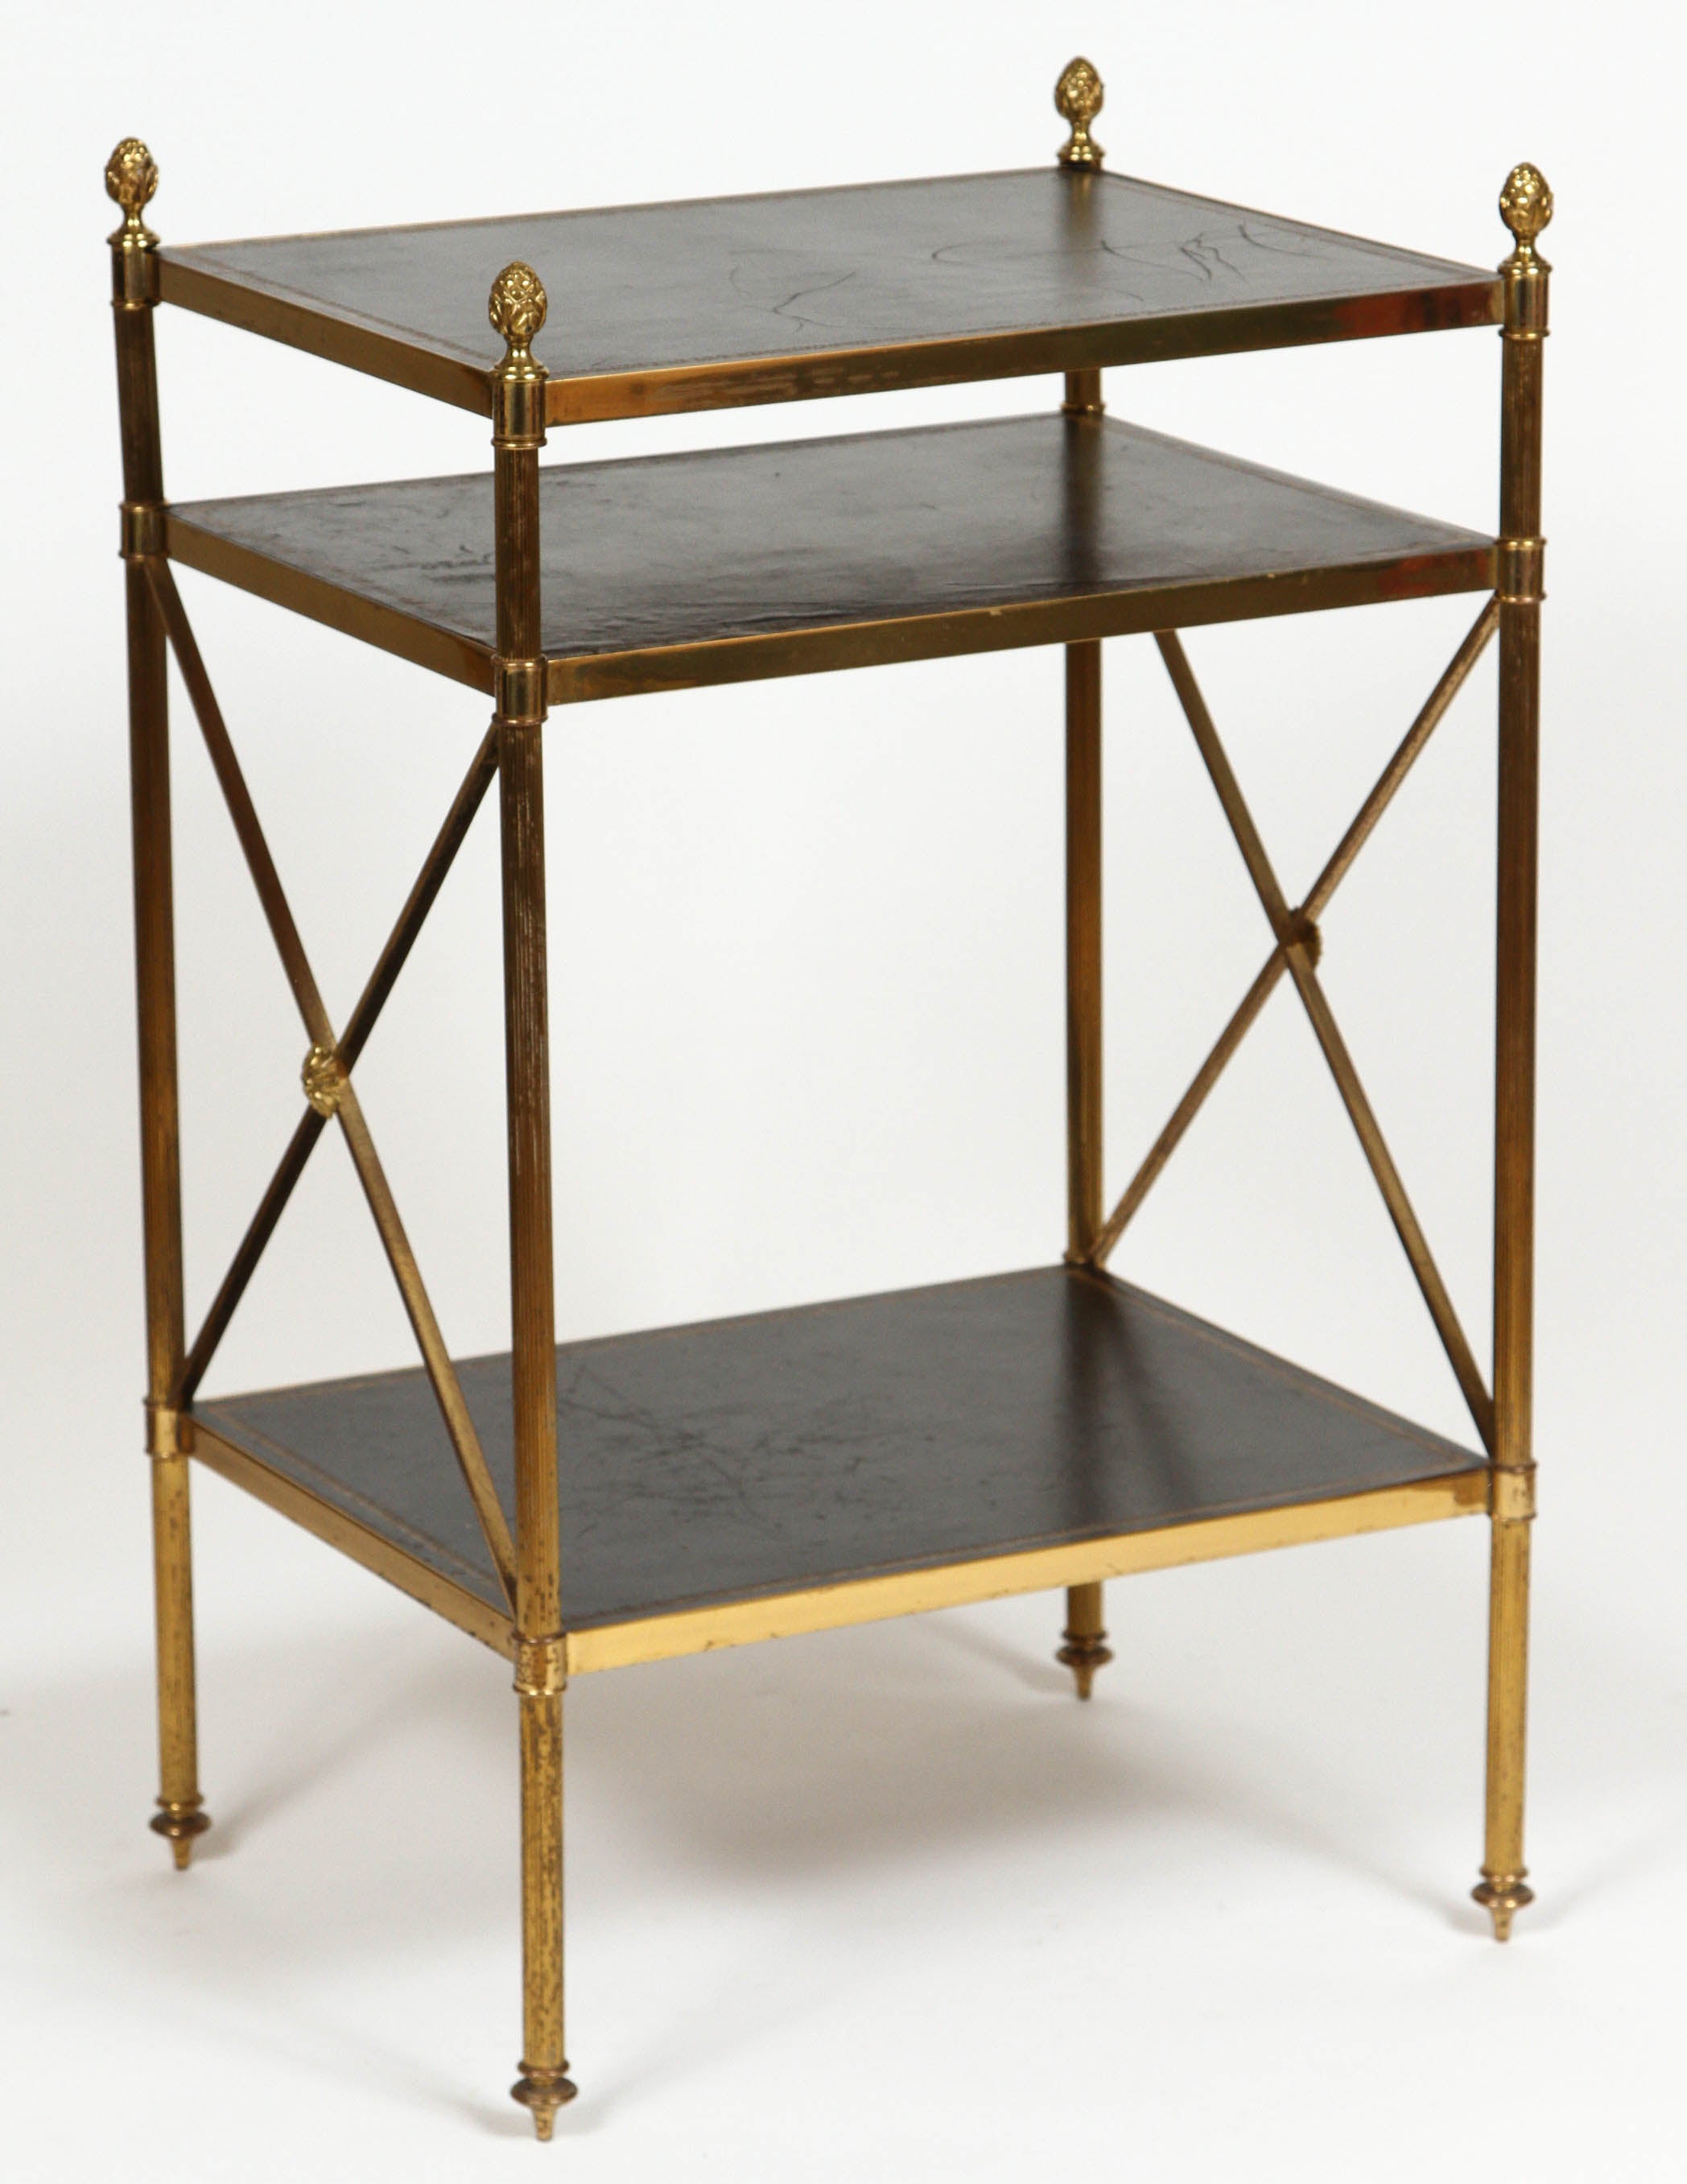 Pair of vintage bronze and brass Maison Baguès side tables. Tables feature three leather topped tiers with hand-tooled Greek key motif in gold and pinecone finials. Made in France, circa 1970. The tables are in good vintage conditions with some